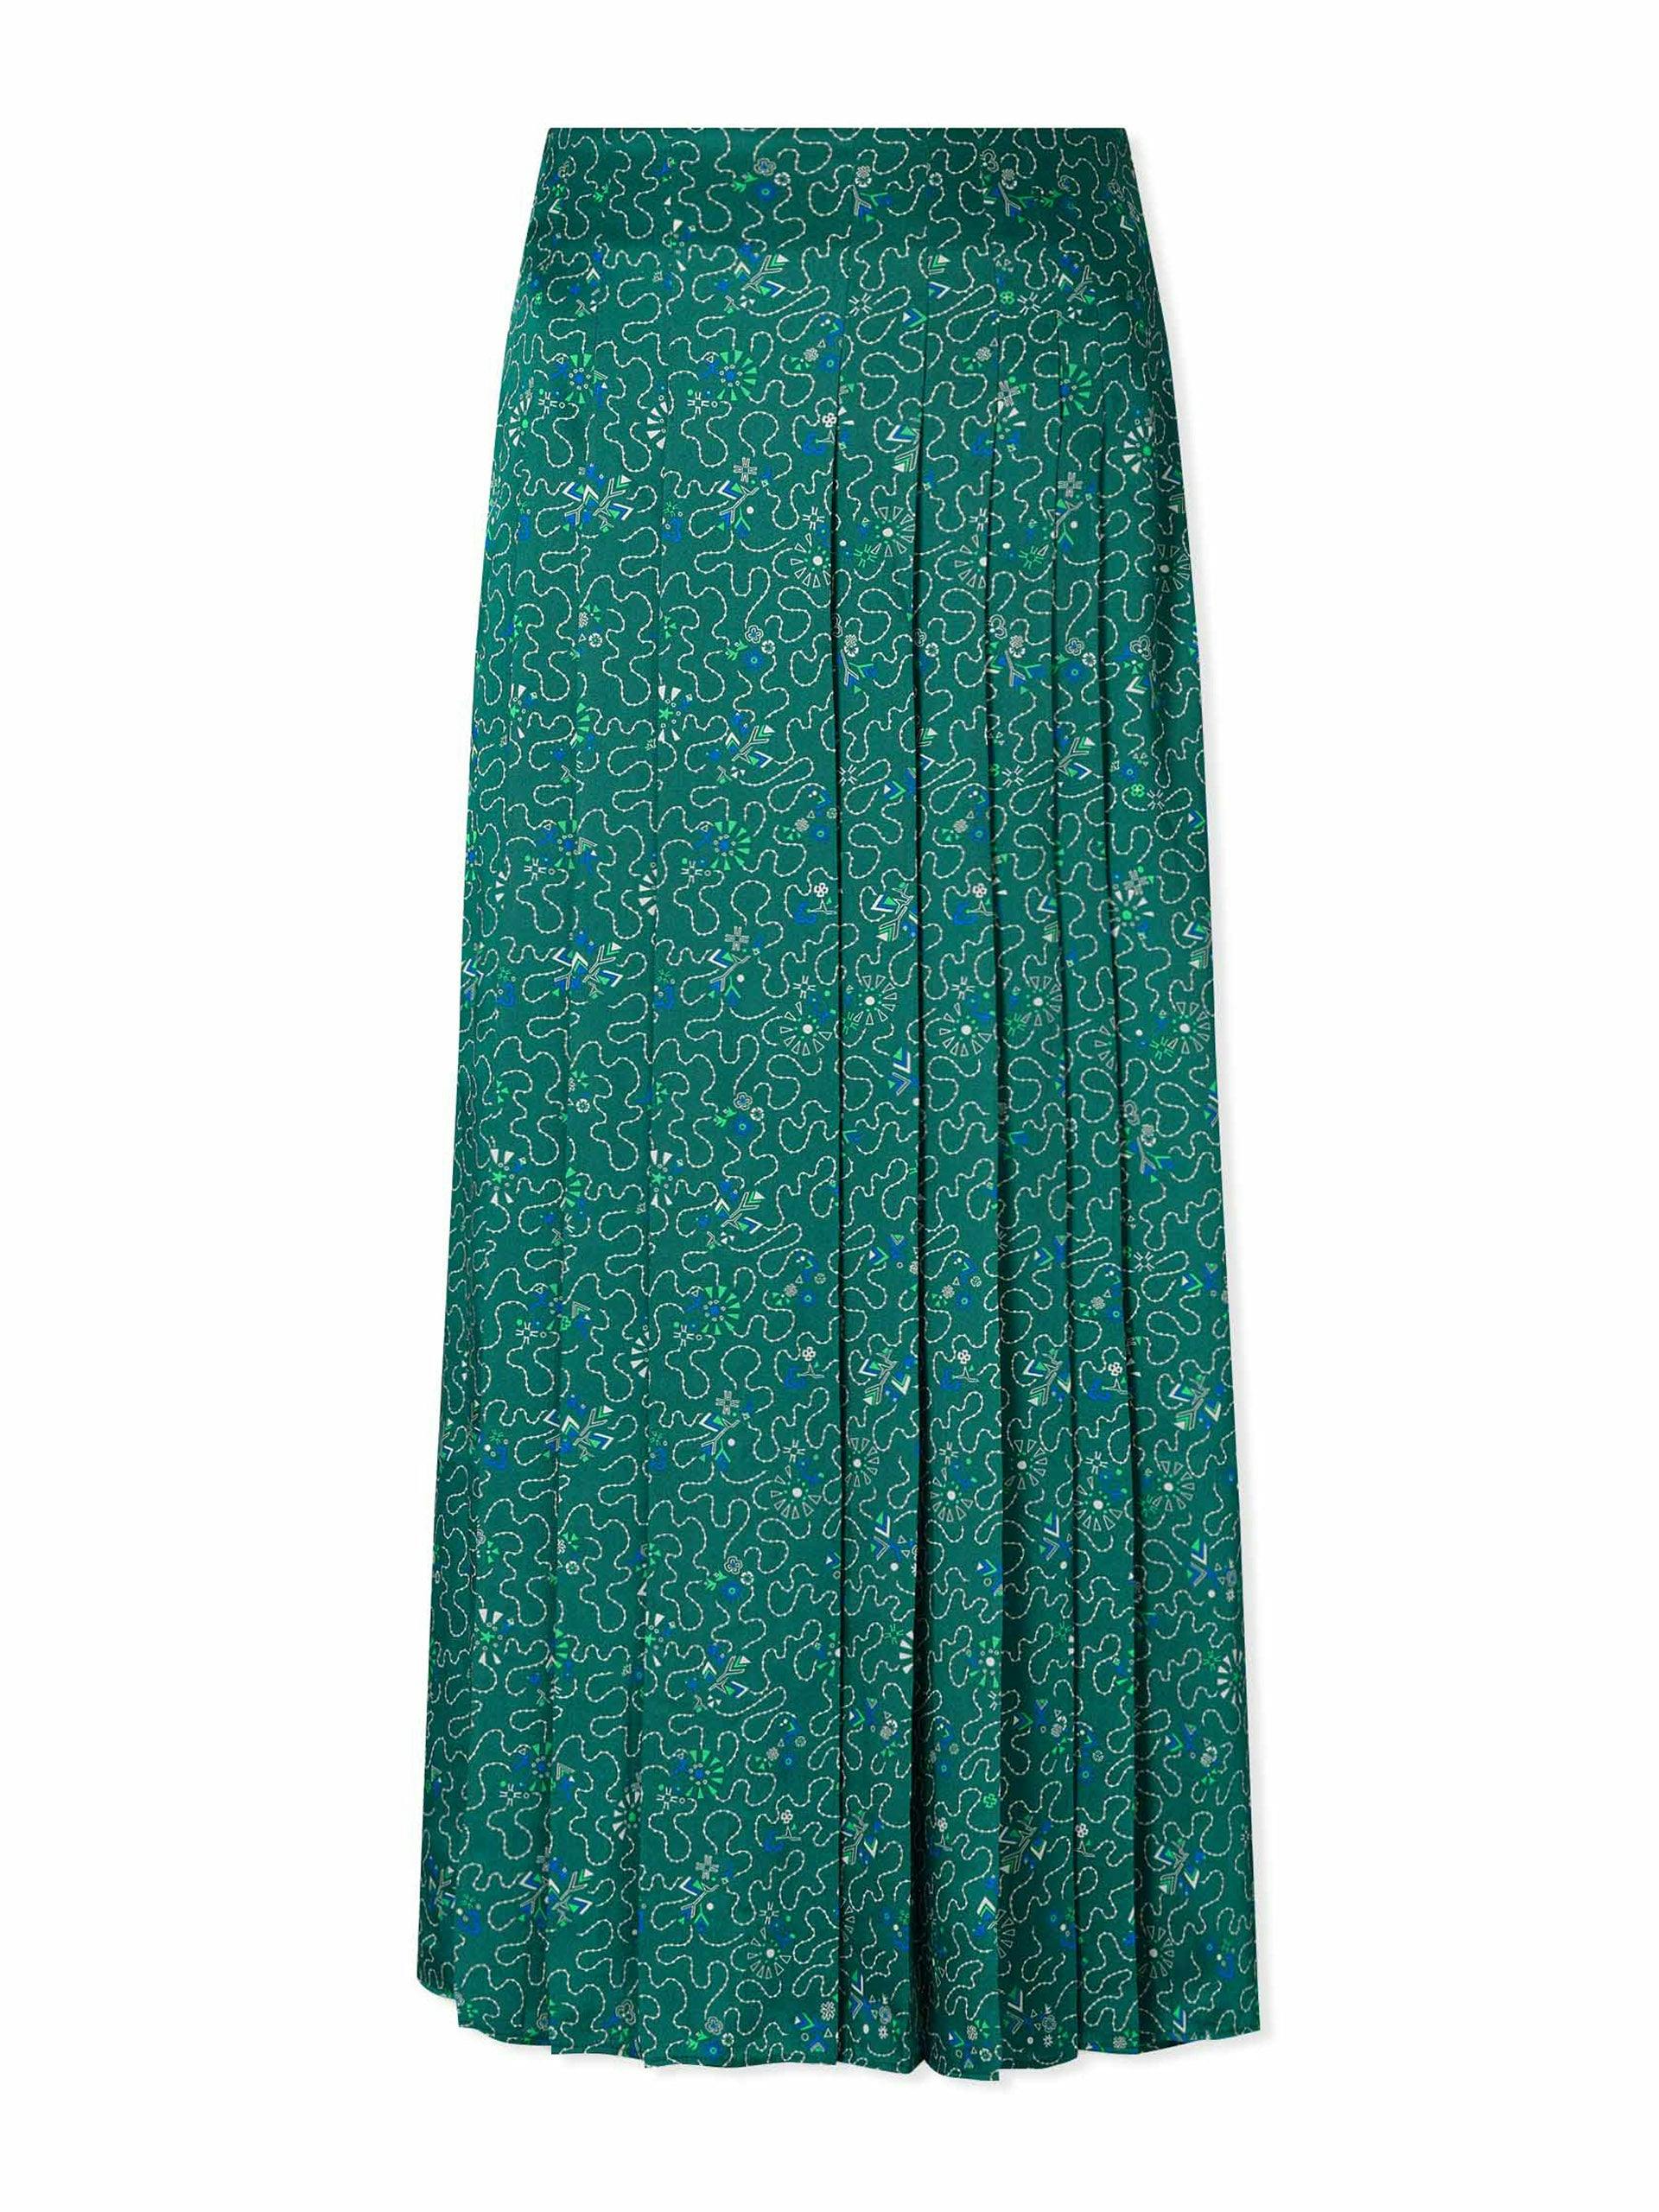 Savannah pleated maxi skirt in green and white wiggle print